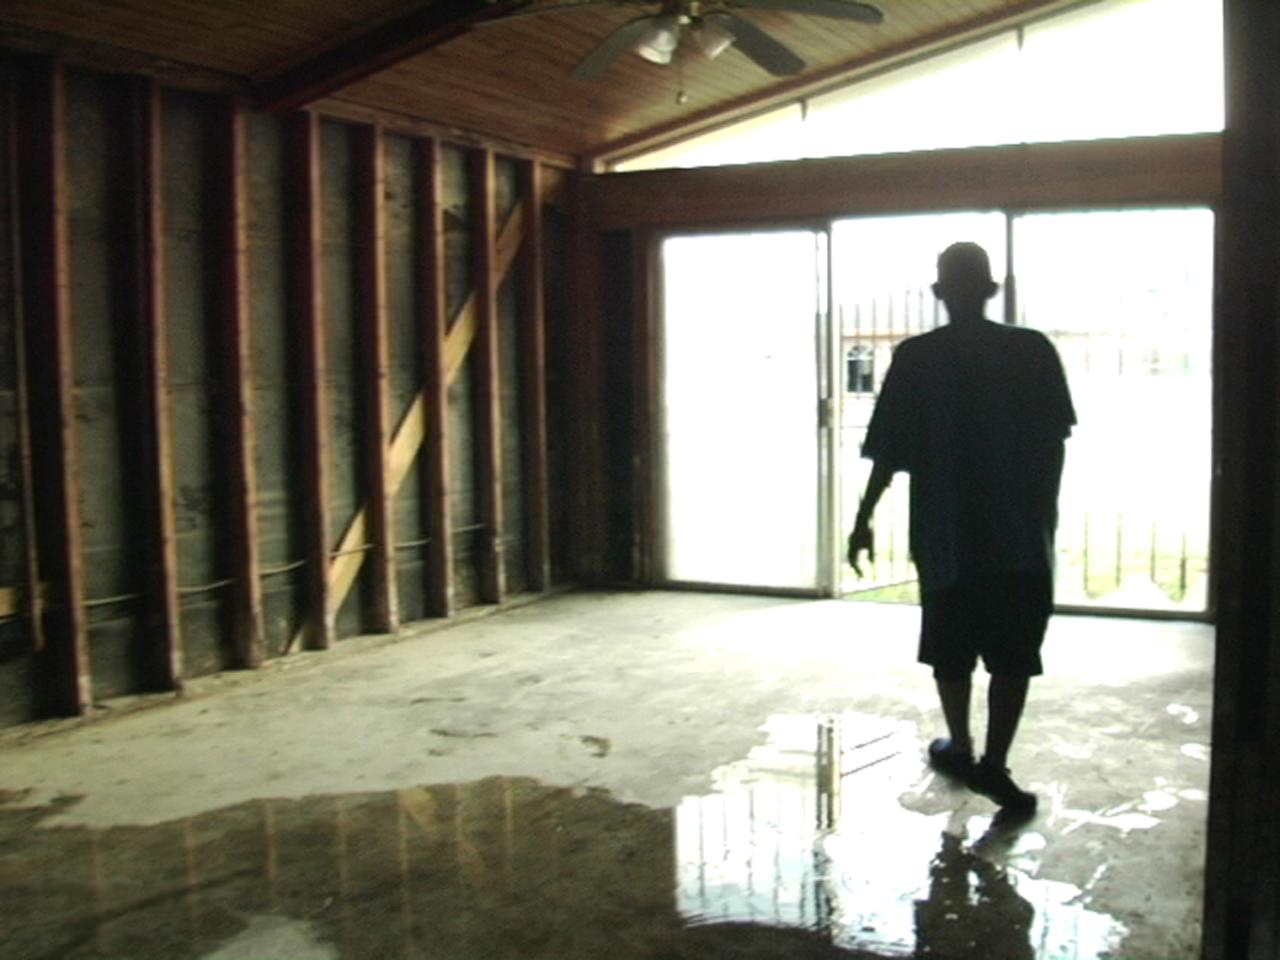 A man stands inside a building where the wall beams are fully exposed and water pools on the cement floor. He is silhouetted against bright windows in the background.